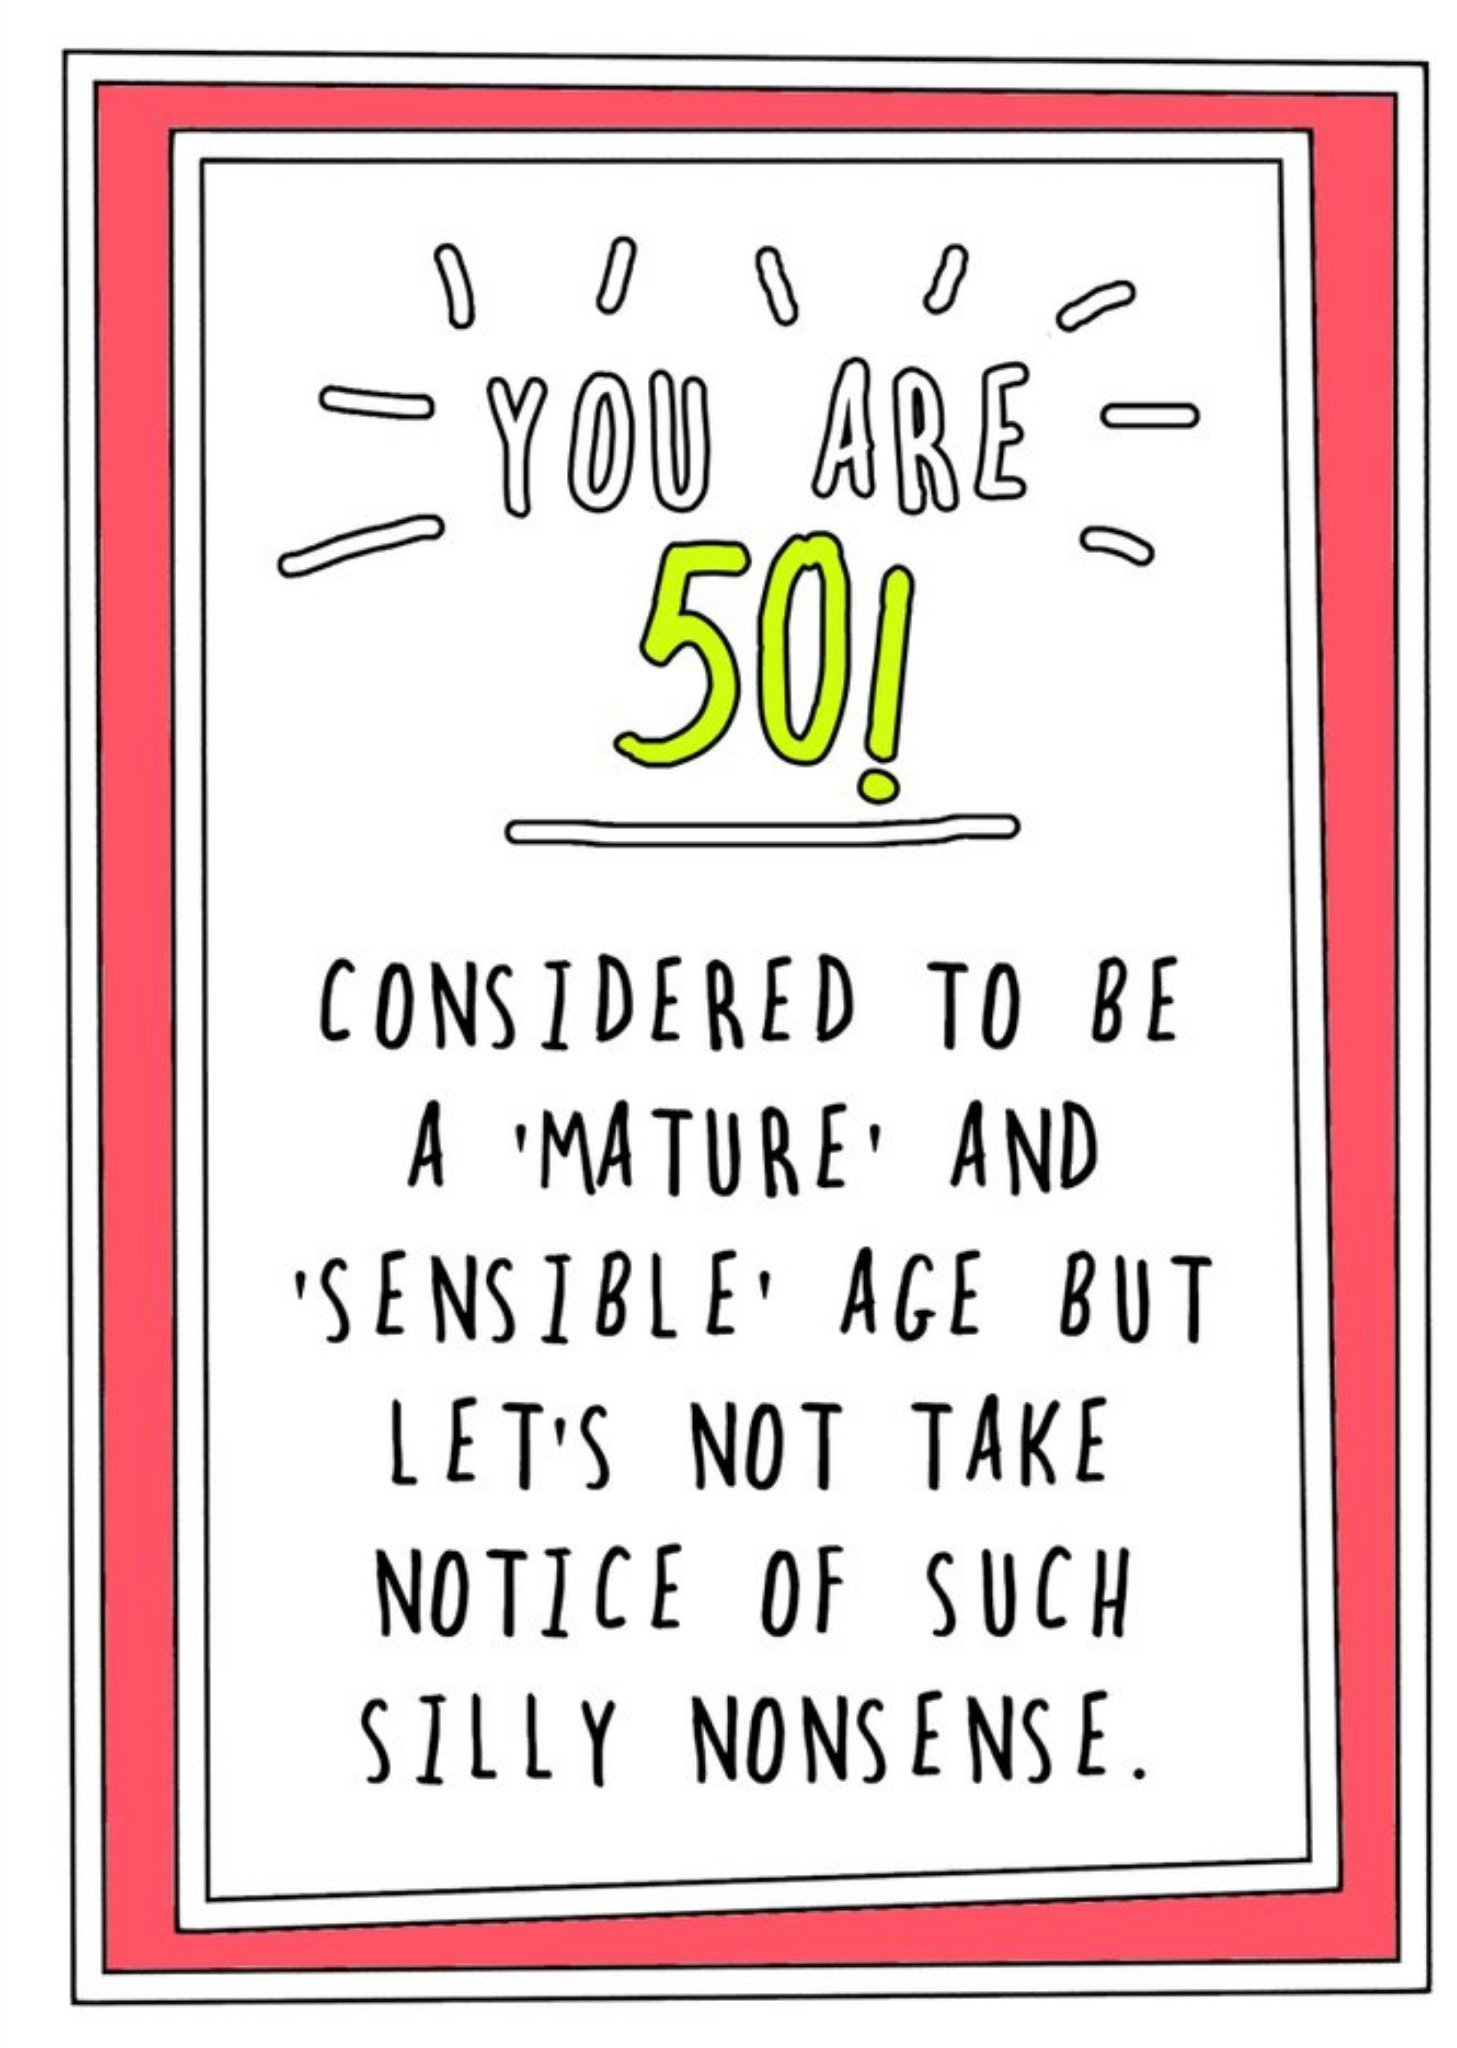 Go La La Funny Cheeky You Are 50 Considered To Be A Mature And Sensible Age Birthday Card Ecard